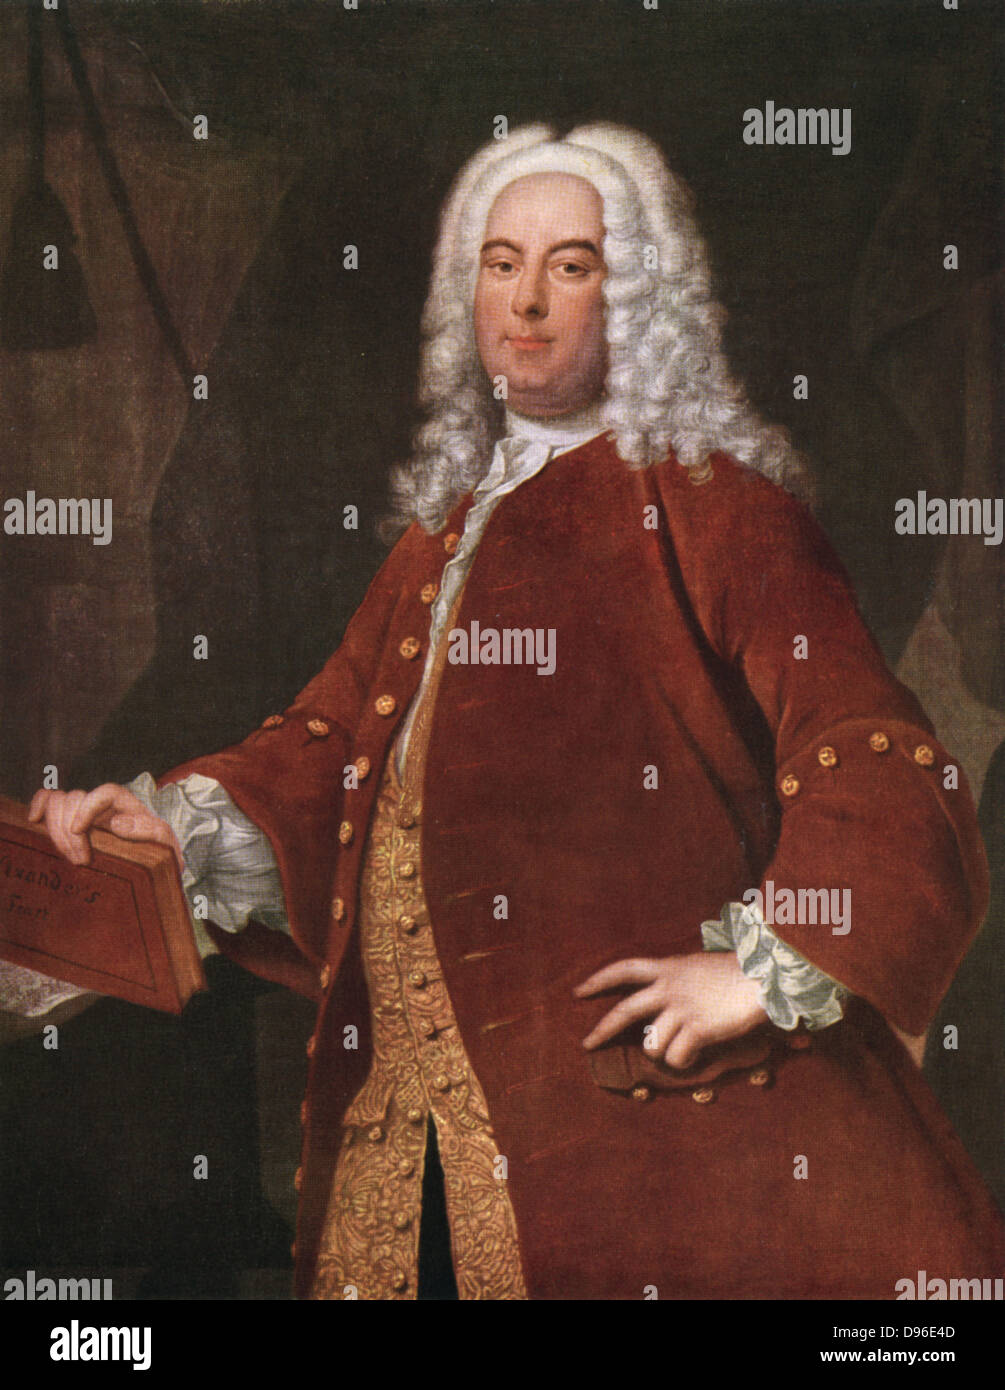 George Frederick Handel (1685-1759) German-English composer born in Halle. After the portrait by Thomas Hudson . Stock Photo